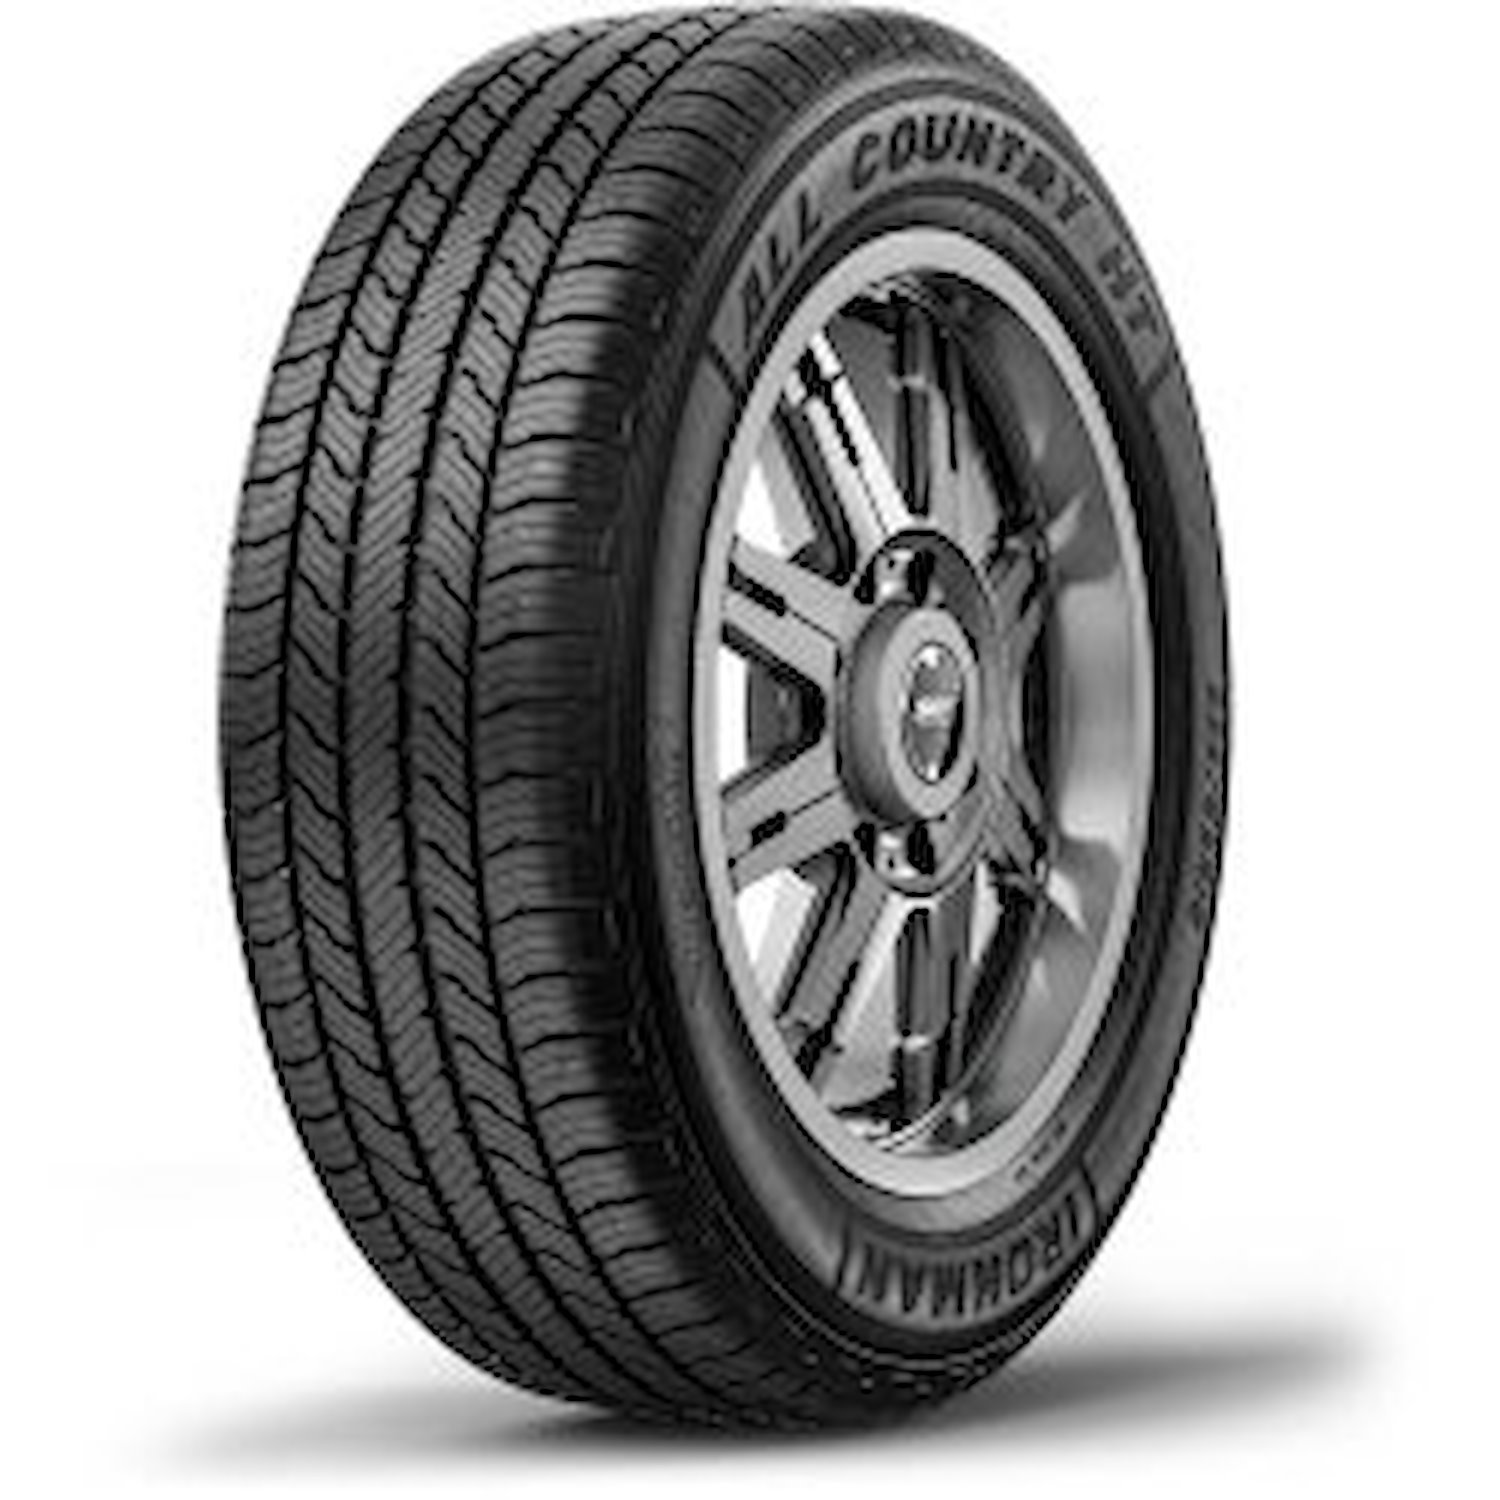 03102 All Country HT Tire, 255/65R17, 110T